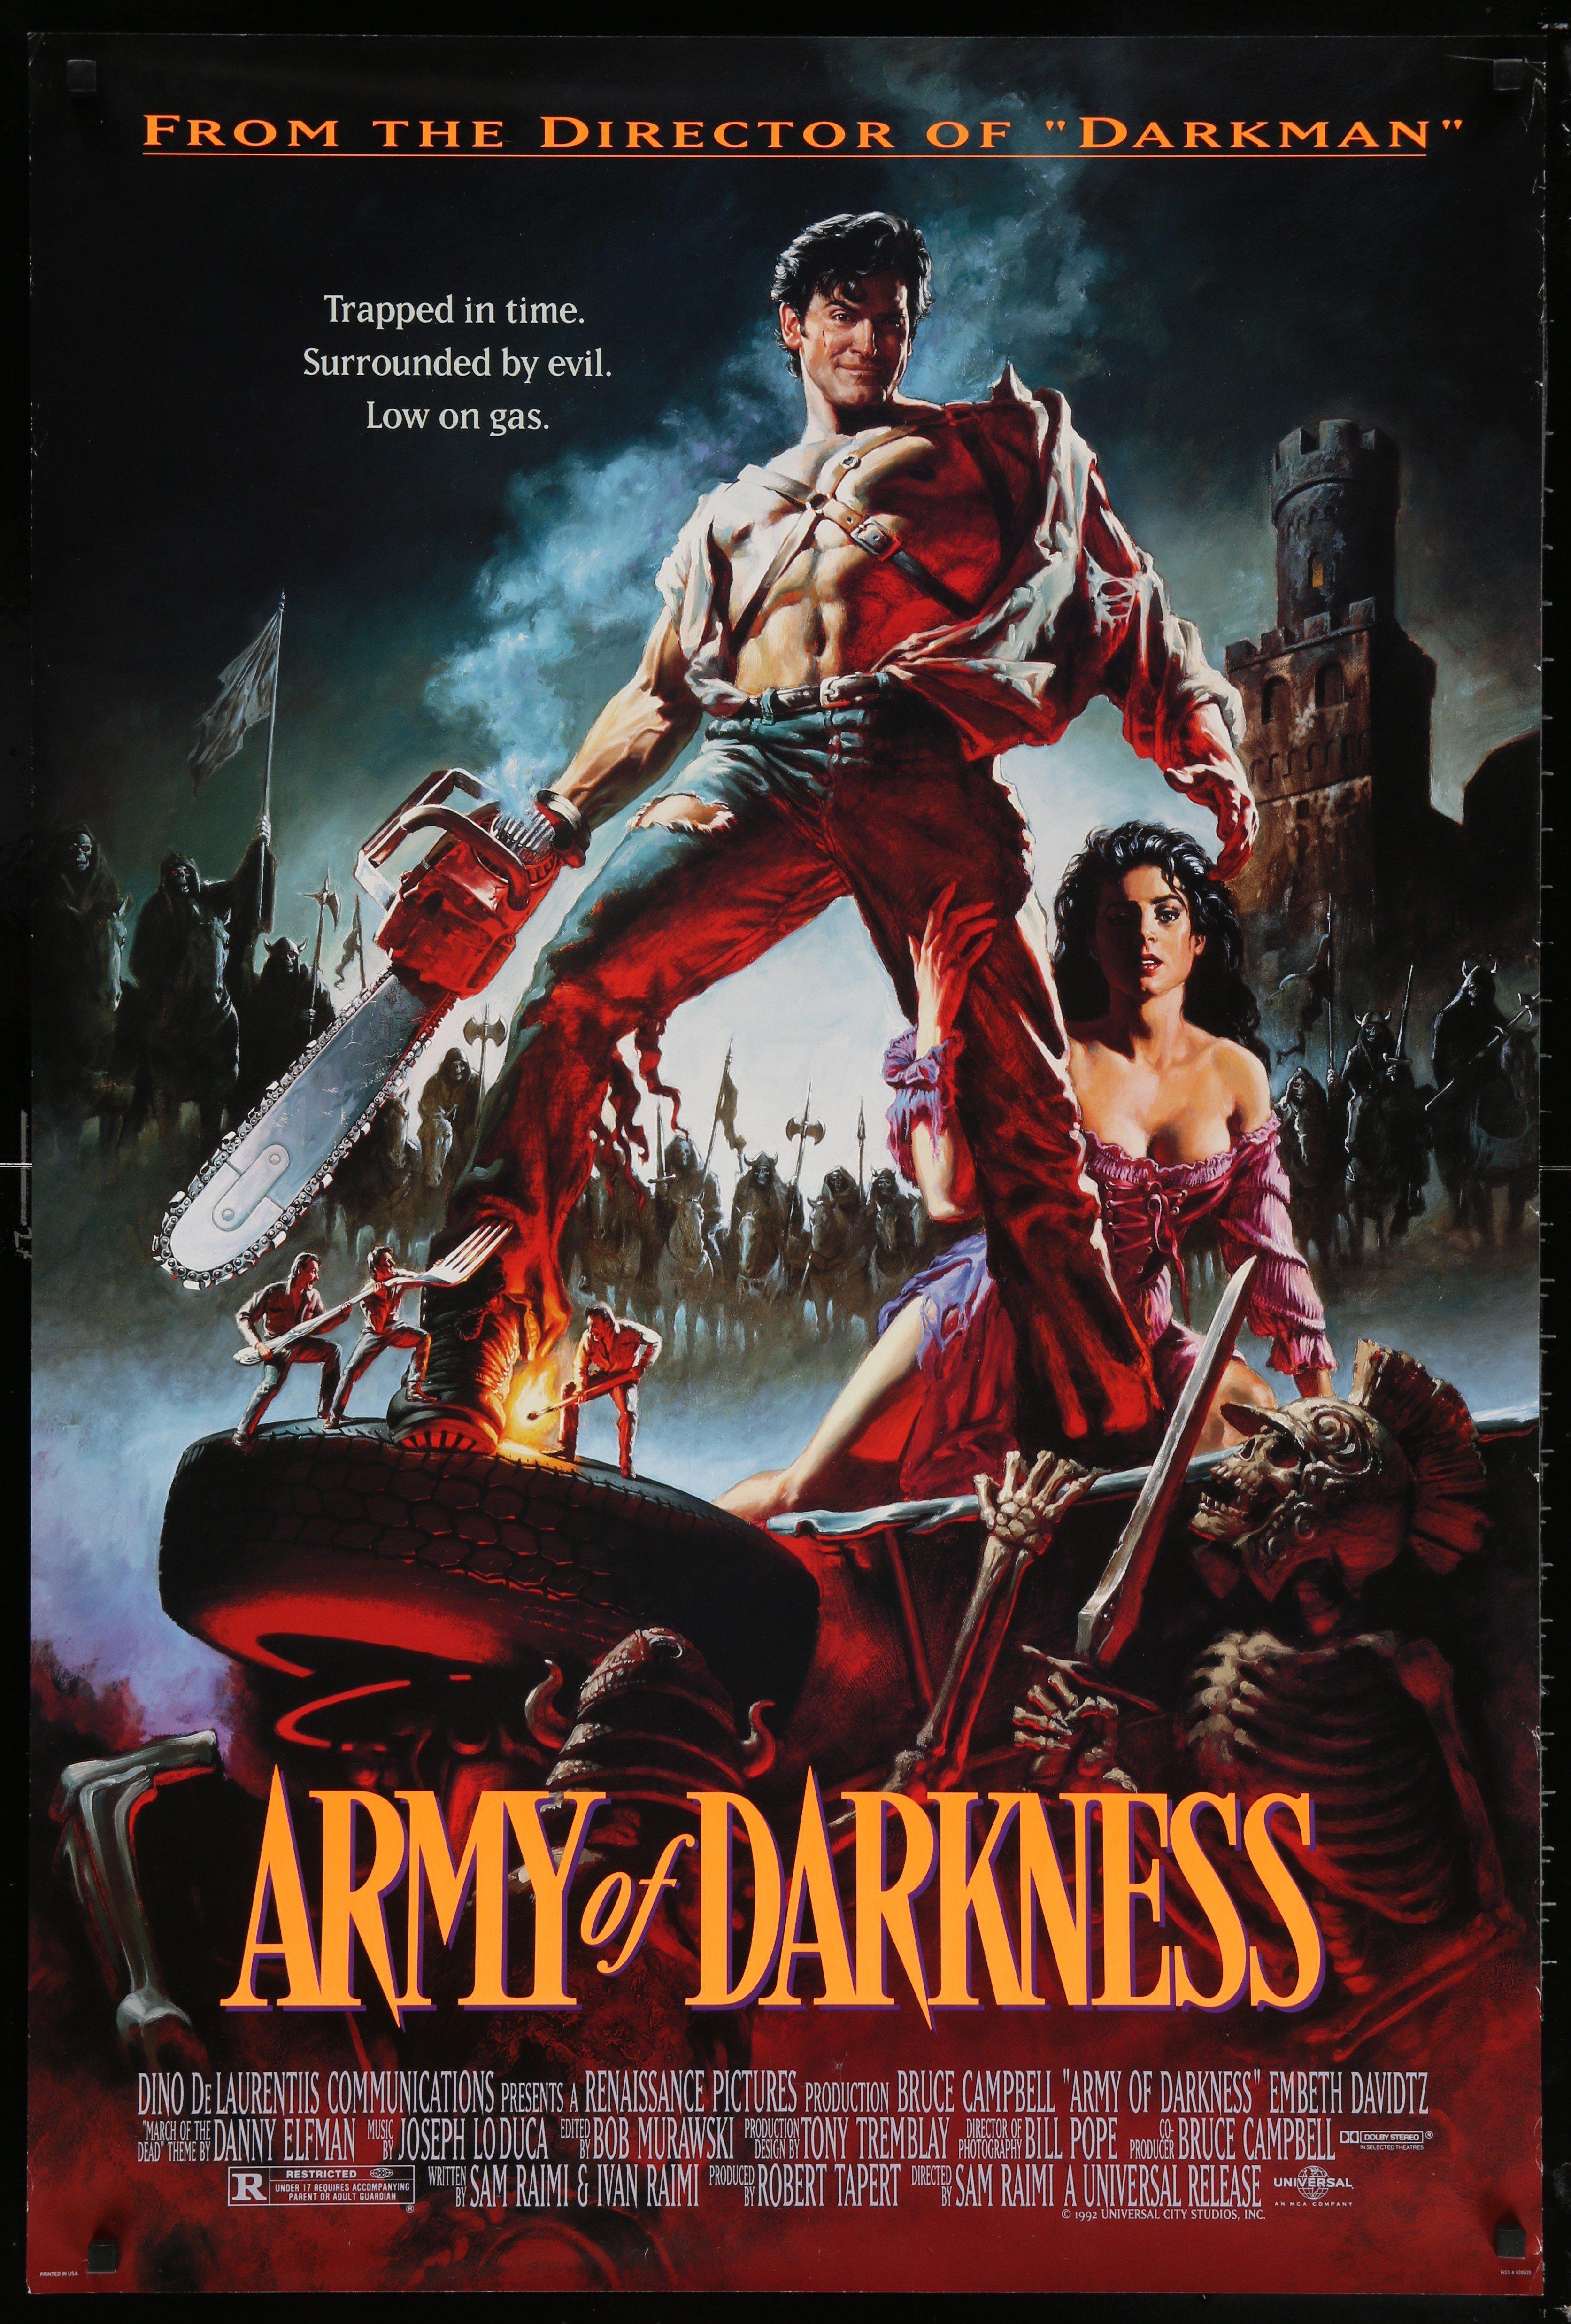 Army of Darkness-an Original Vintage Movie Poster for Sam 